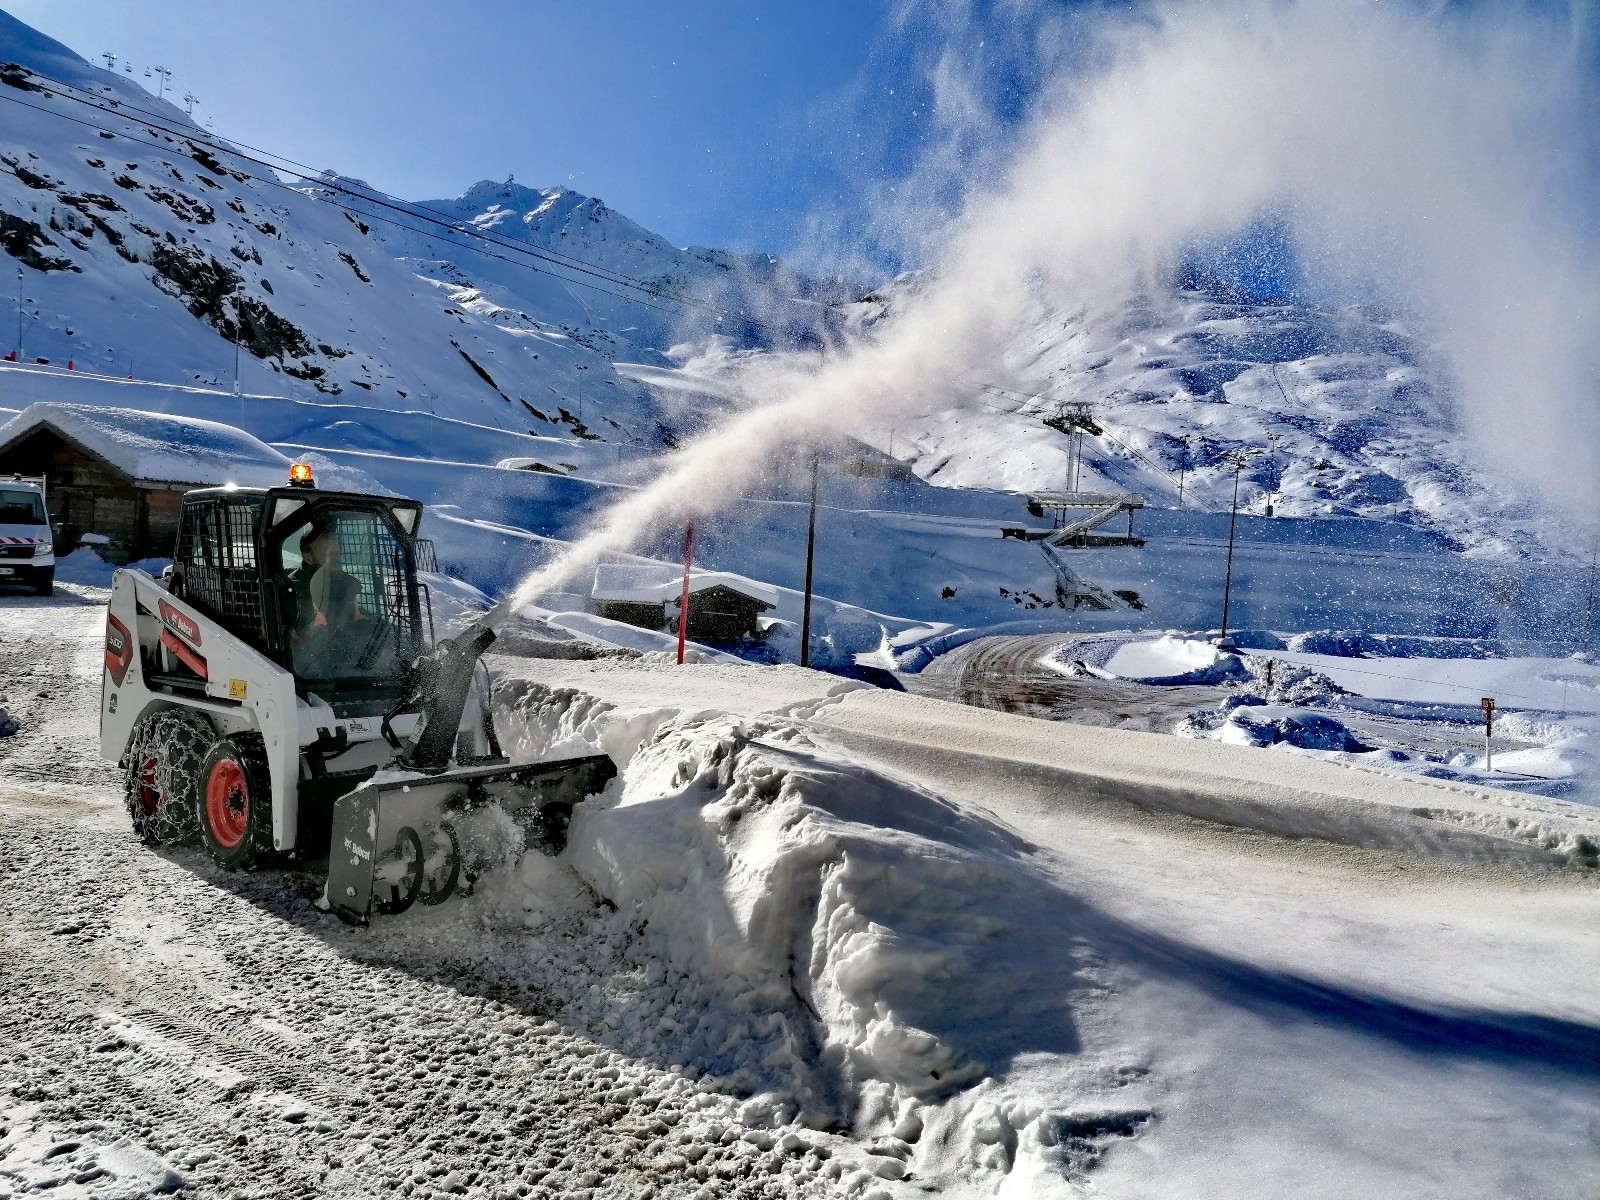 Bobcat toughness tackles extreme conditions in Val Thorens